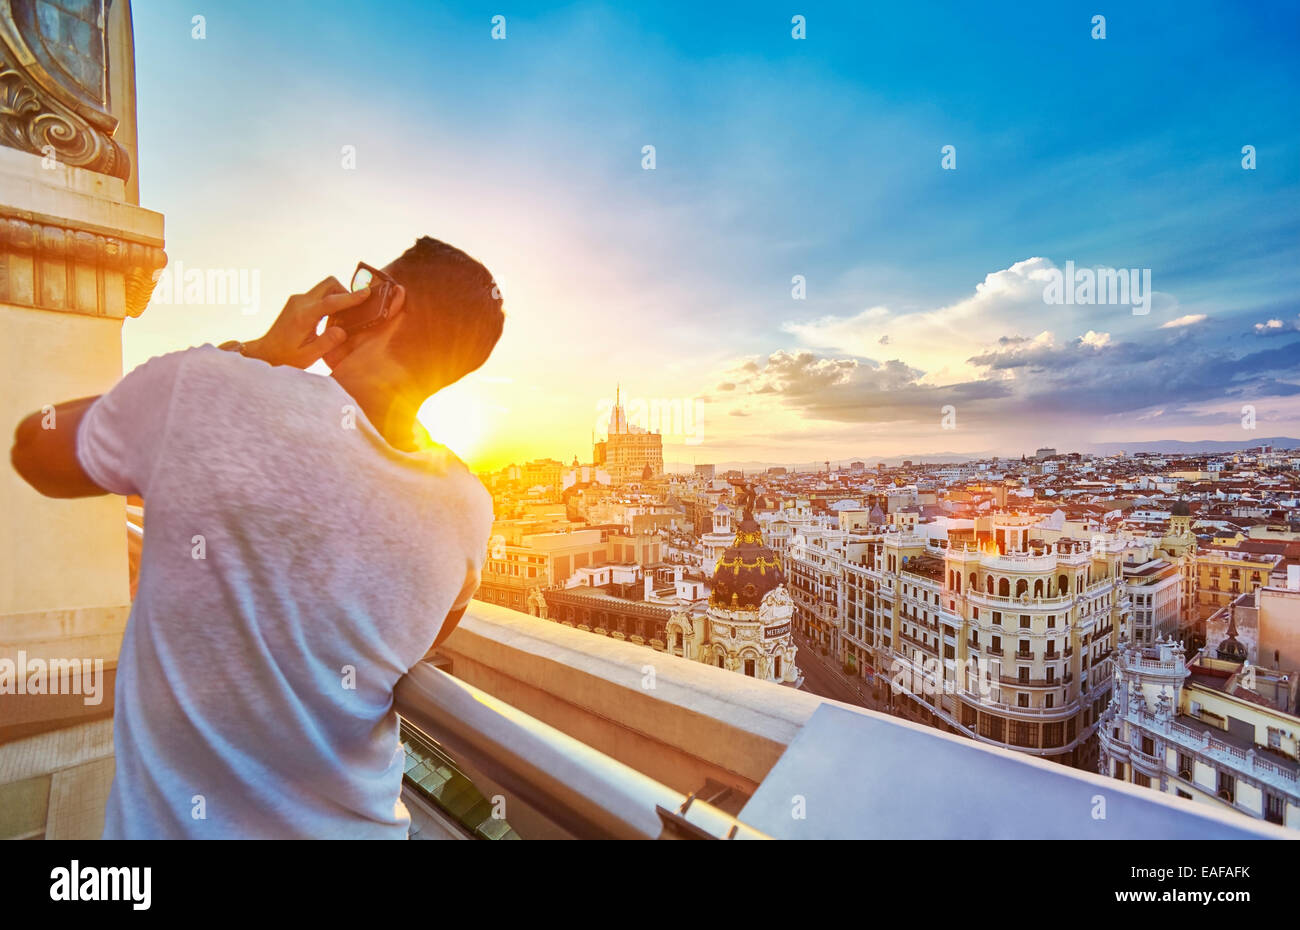 Man on the phone at The Circulo de Bellas artes cultural center rooftop terrace. Madrid. Spain Stock Photo